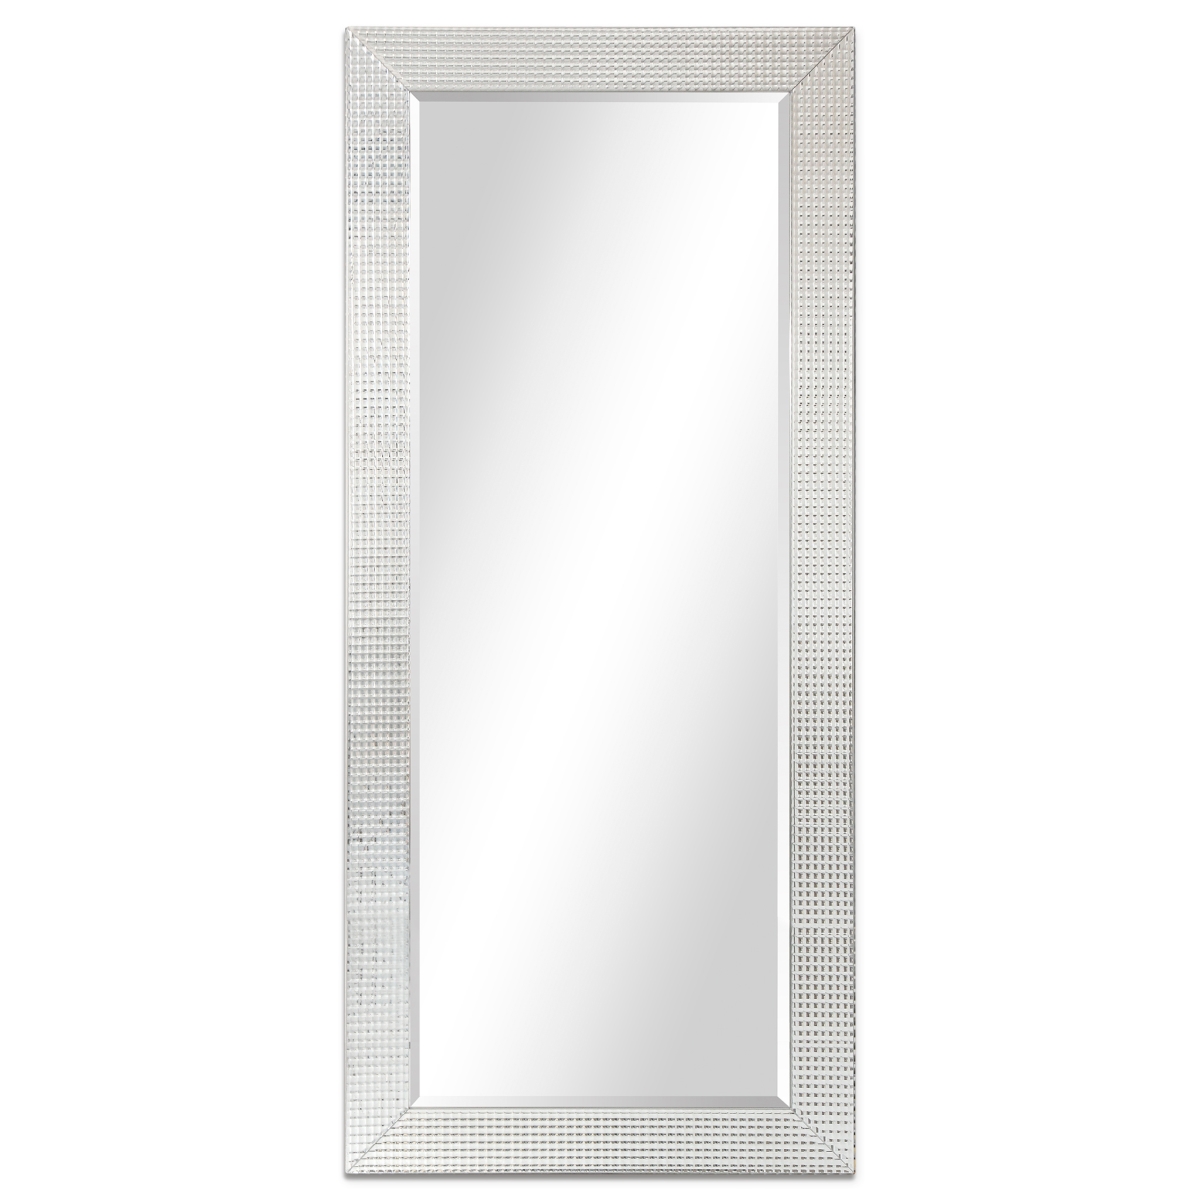 Mom-20030psm-2454 24 X 54 In. Solid Wood Frame Covered Wall Mirror With Beveled Prism Mirror Panels - 1 In. Beveled Edge